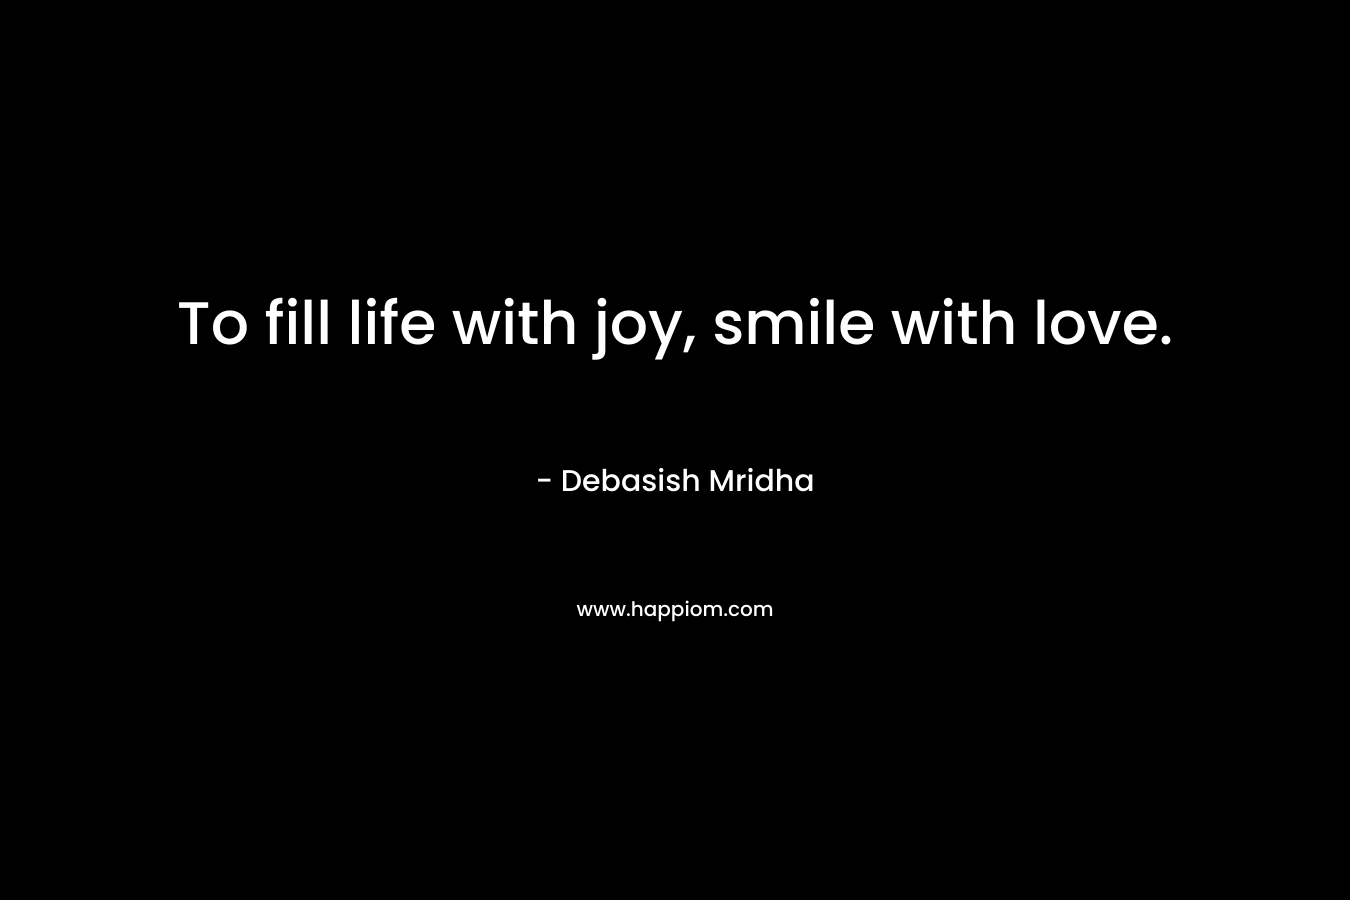 To fill life with joy, smile with love.